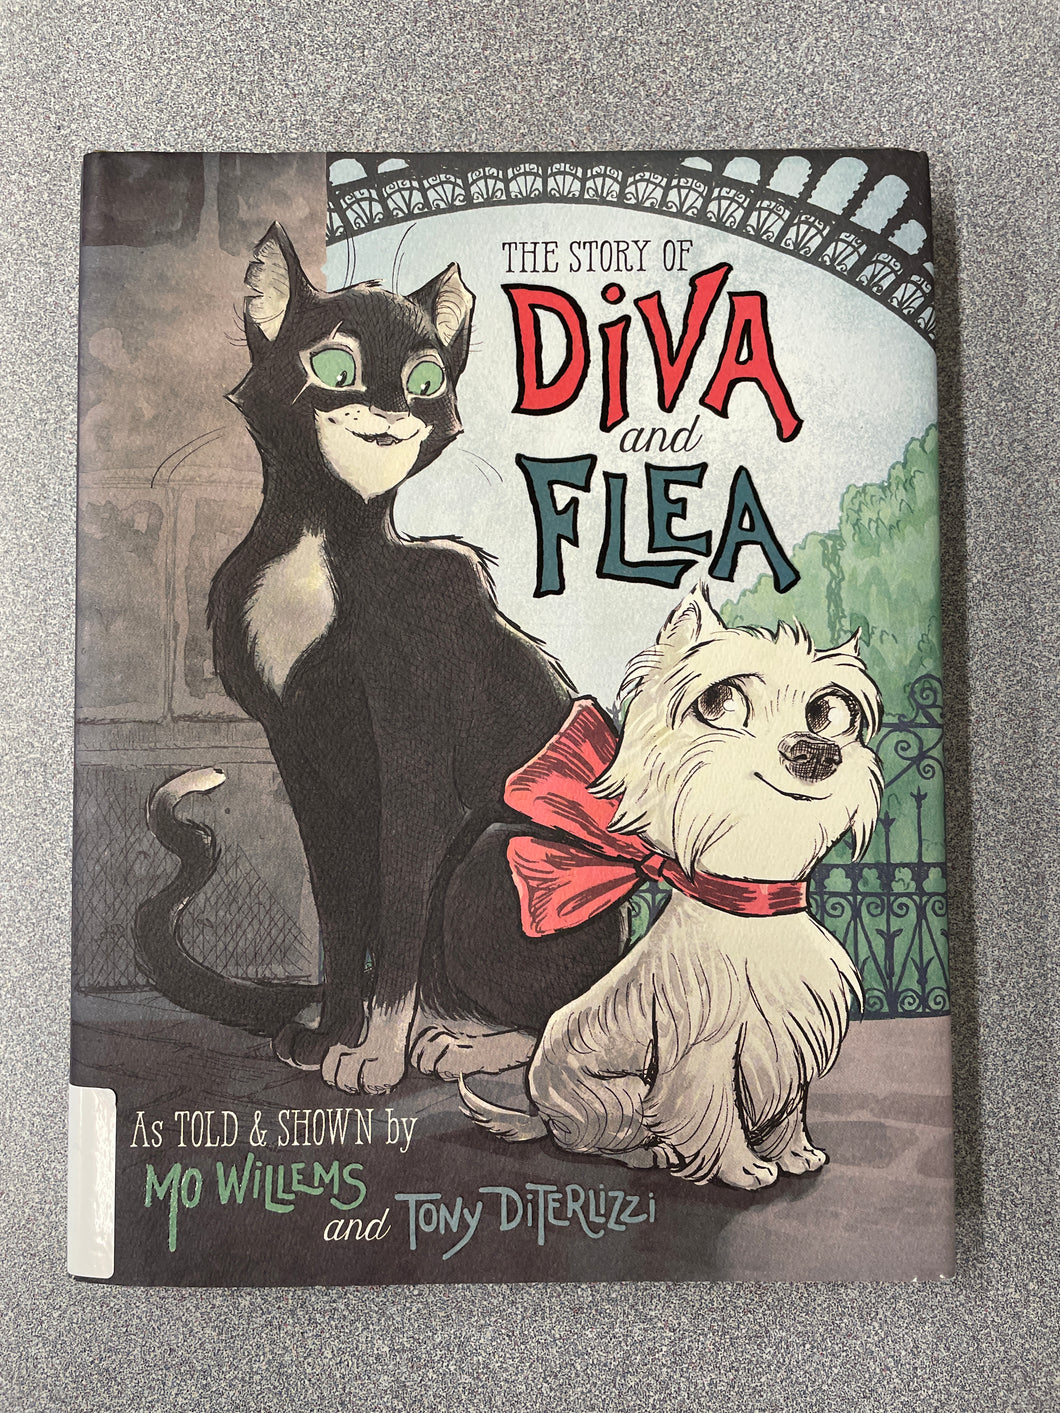 Willems, Mo and Tony Diterlizzi, The Story of Diva and Flea [2015] YF 1/24